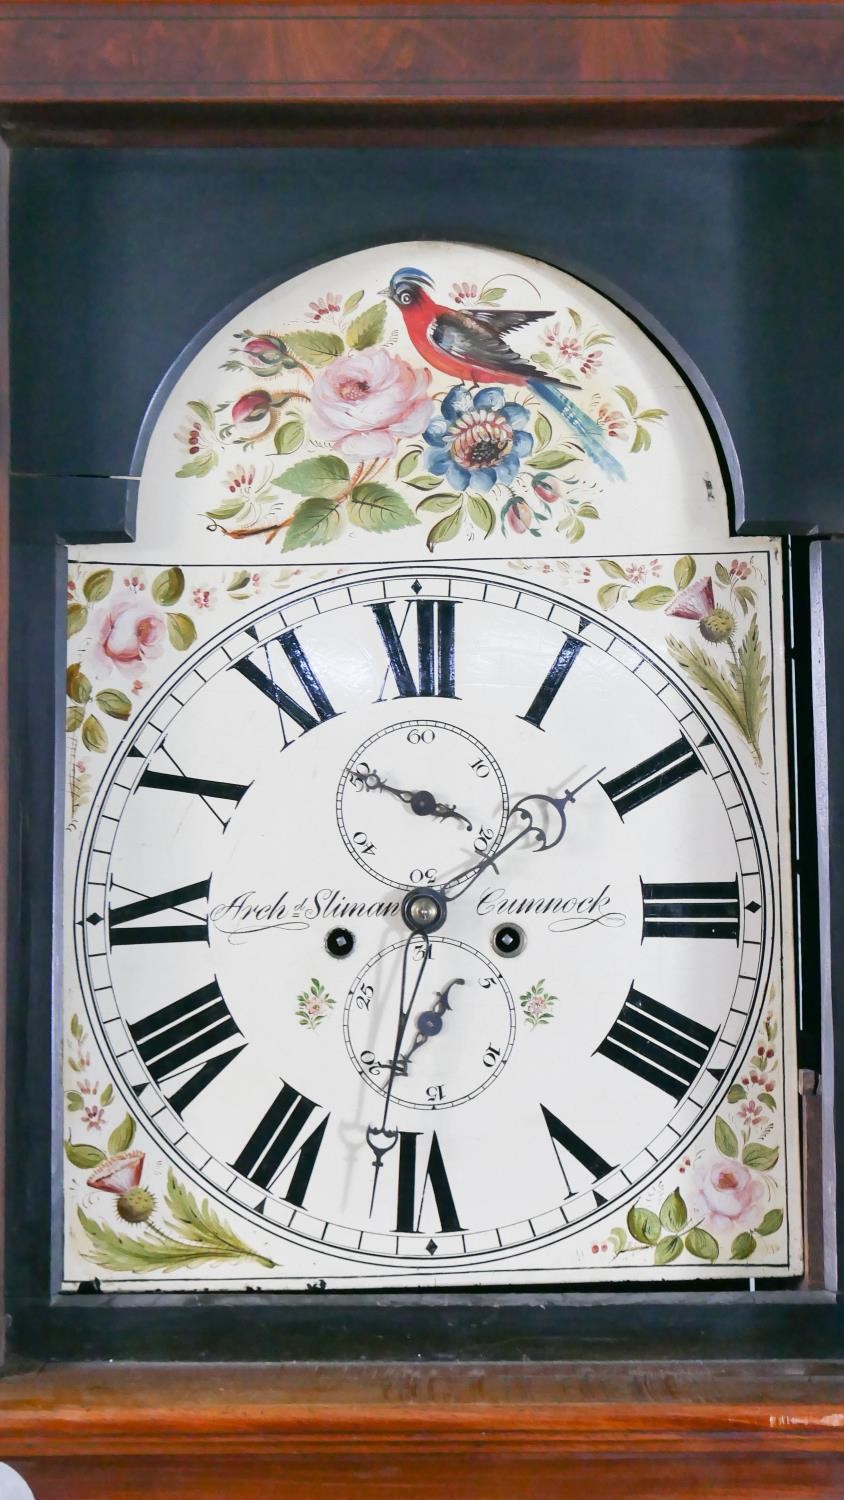 A 19th century mahogany cased longcase clock, the painted dial marked for Archibald Sliman, Cunnock, - Image 4 of 7